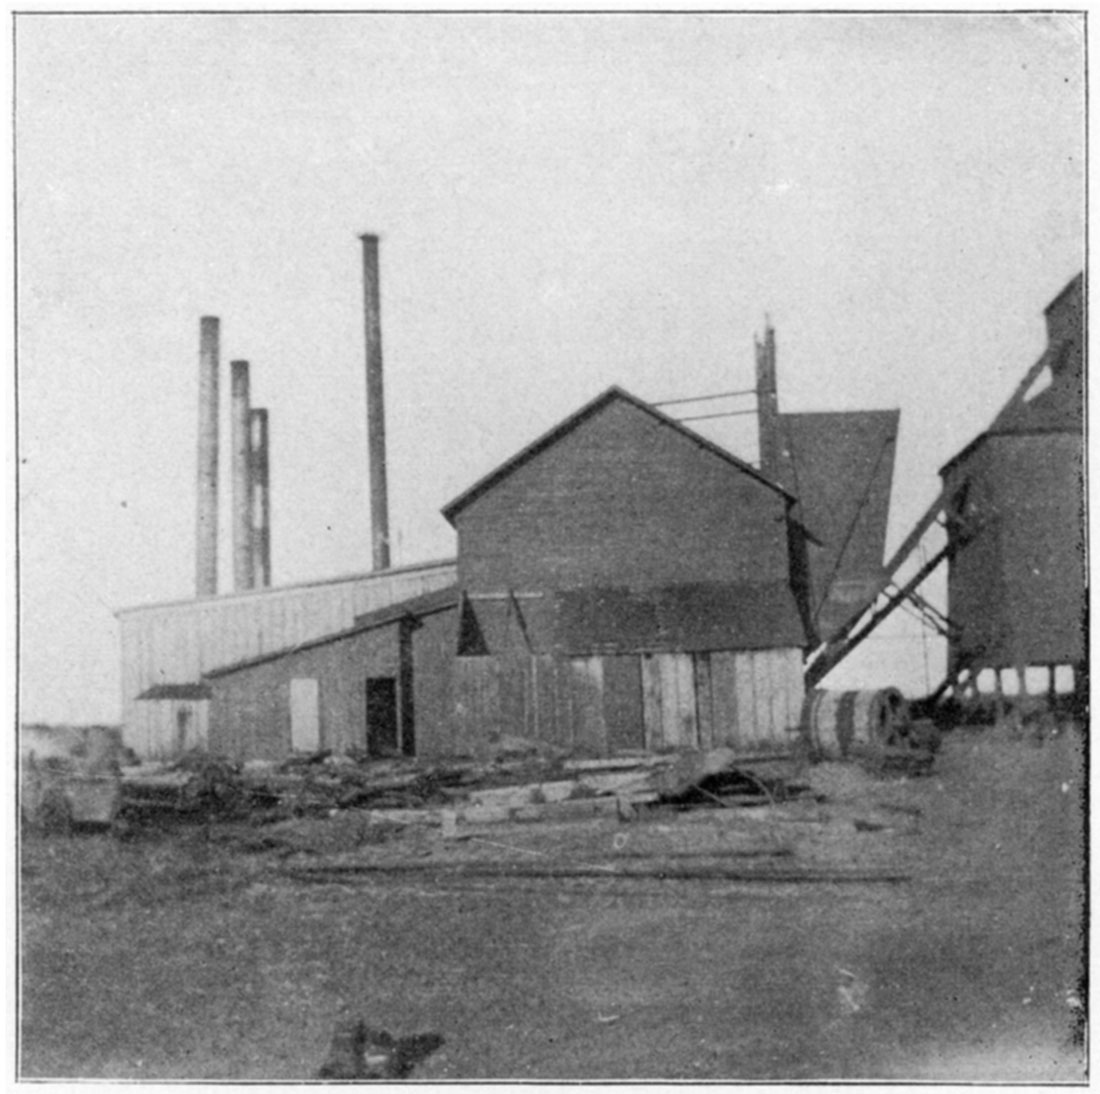 Black and white photo of Fan House, as seen at mine near Weir City.